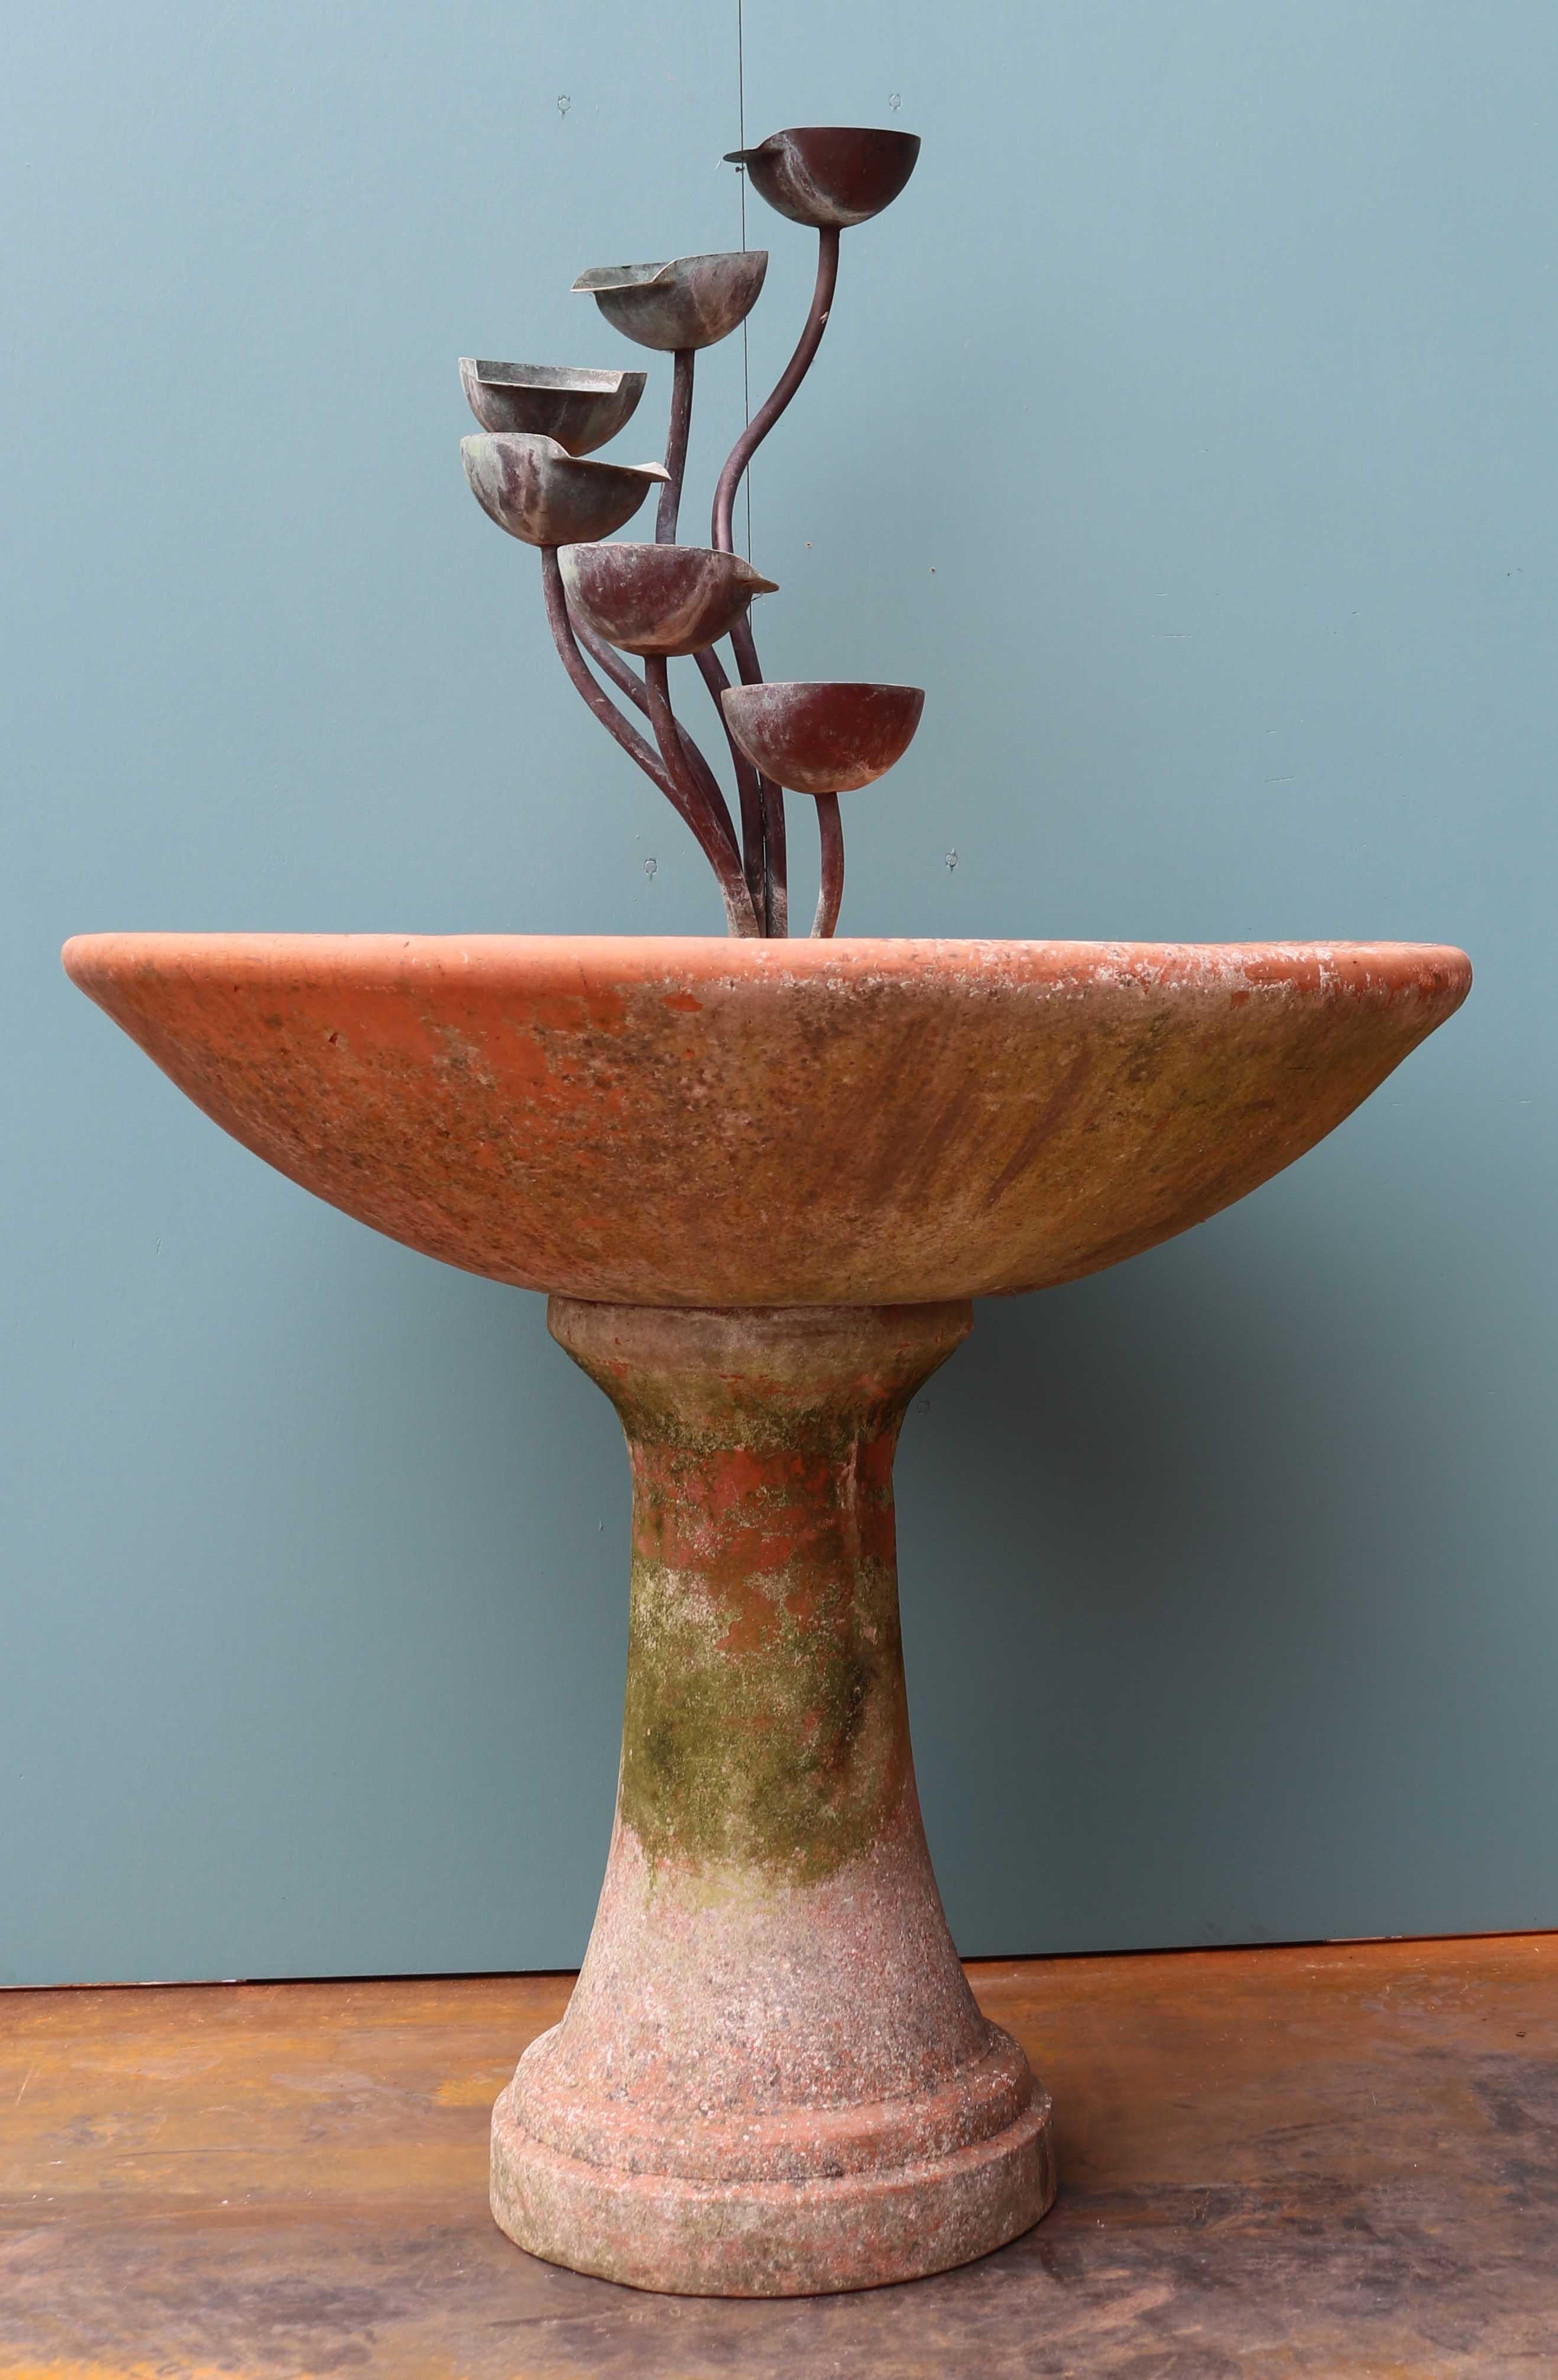 About

A large reclaimed 1930s terracotta bird bath or fountain. From the property in Suffolk.

Please see image of copper water fountain and terracotta bowl for inspiration for this piece.

Condition report

Some weathering to the inside